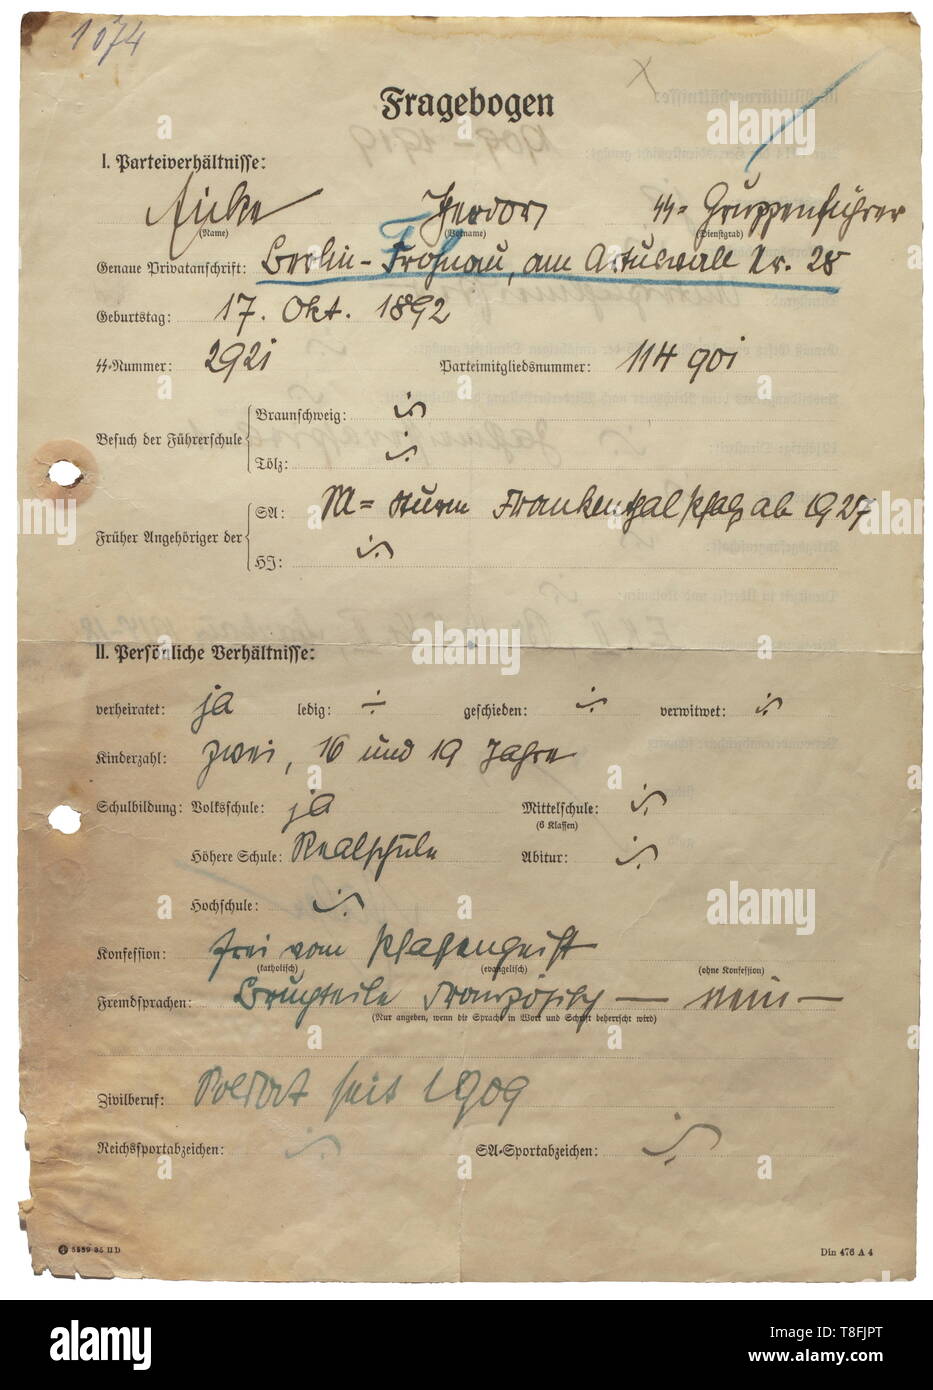 Theodor Eicke - an SS questionnaire Questionnaire regarding rank ('SS-Gruppenführer'), SS- and party numbers ('2921' and '114901'), children, education, denomination ('free of priestly spirits'), foreign languages ('broken French'), civilian occupation ('Soldier since 1909'), war decorations ('Iron Cross 2nd Class II, Br.Kr, V.Kr.II, Cross of Honour 1914 - 18'). With Eicke's original signature in blue ink. historic, historical, 20th century, 1930s, 1940s, Waffen-SS, armed division of the SS, armed service, armed services, NS, National Socialism, Nazism, Third Reich, German , Editorial-Use-Only Stock Photo